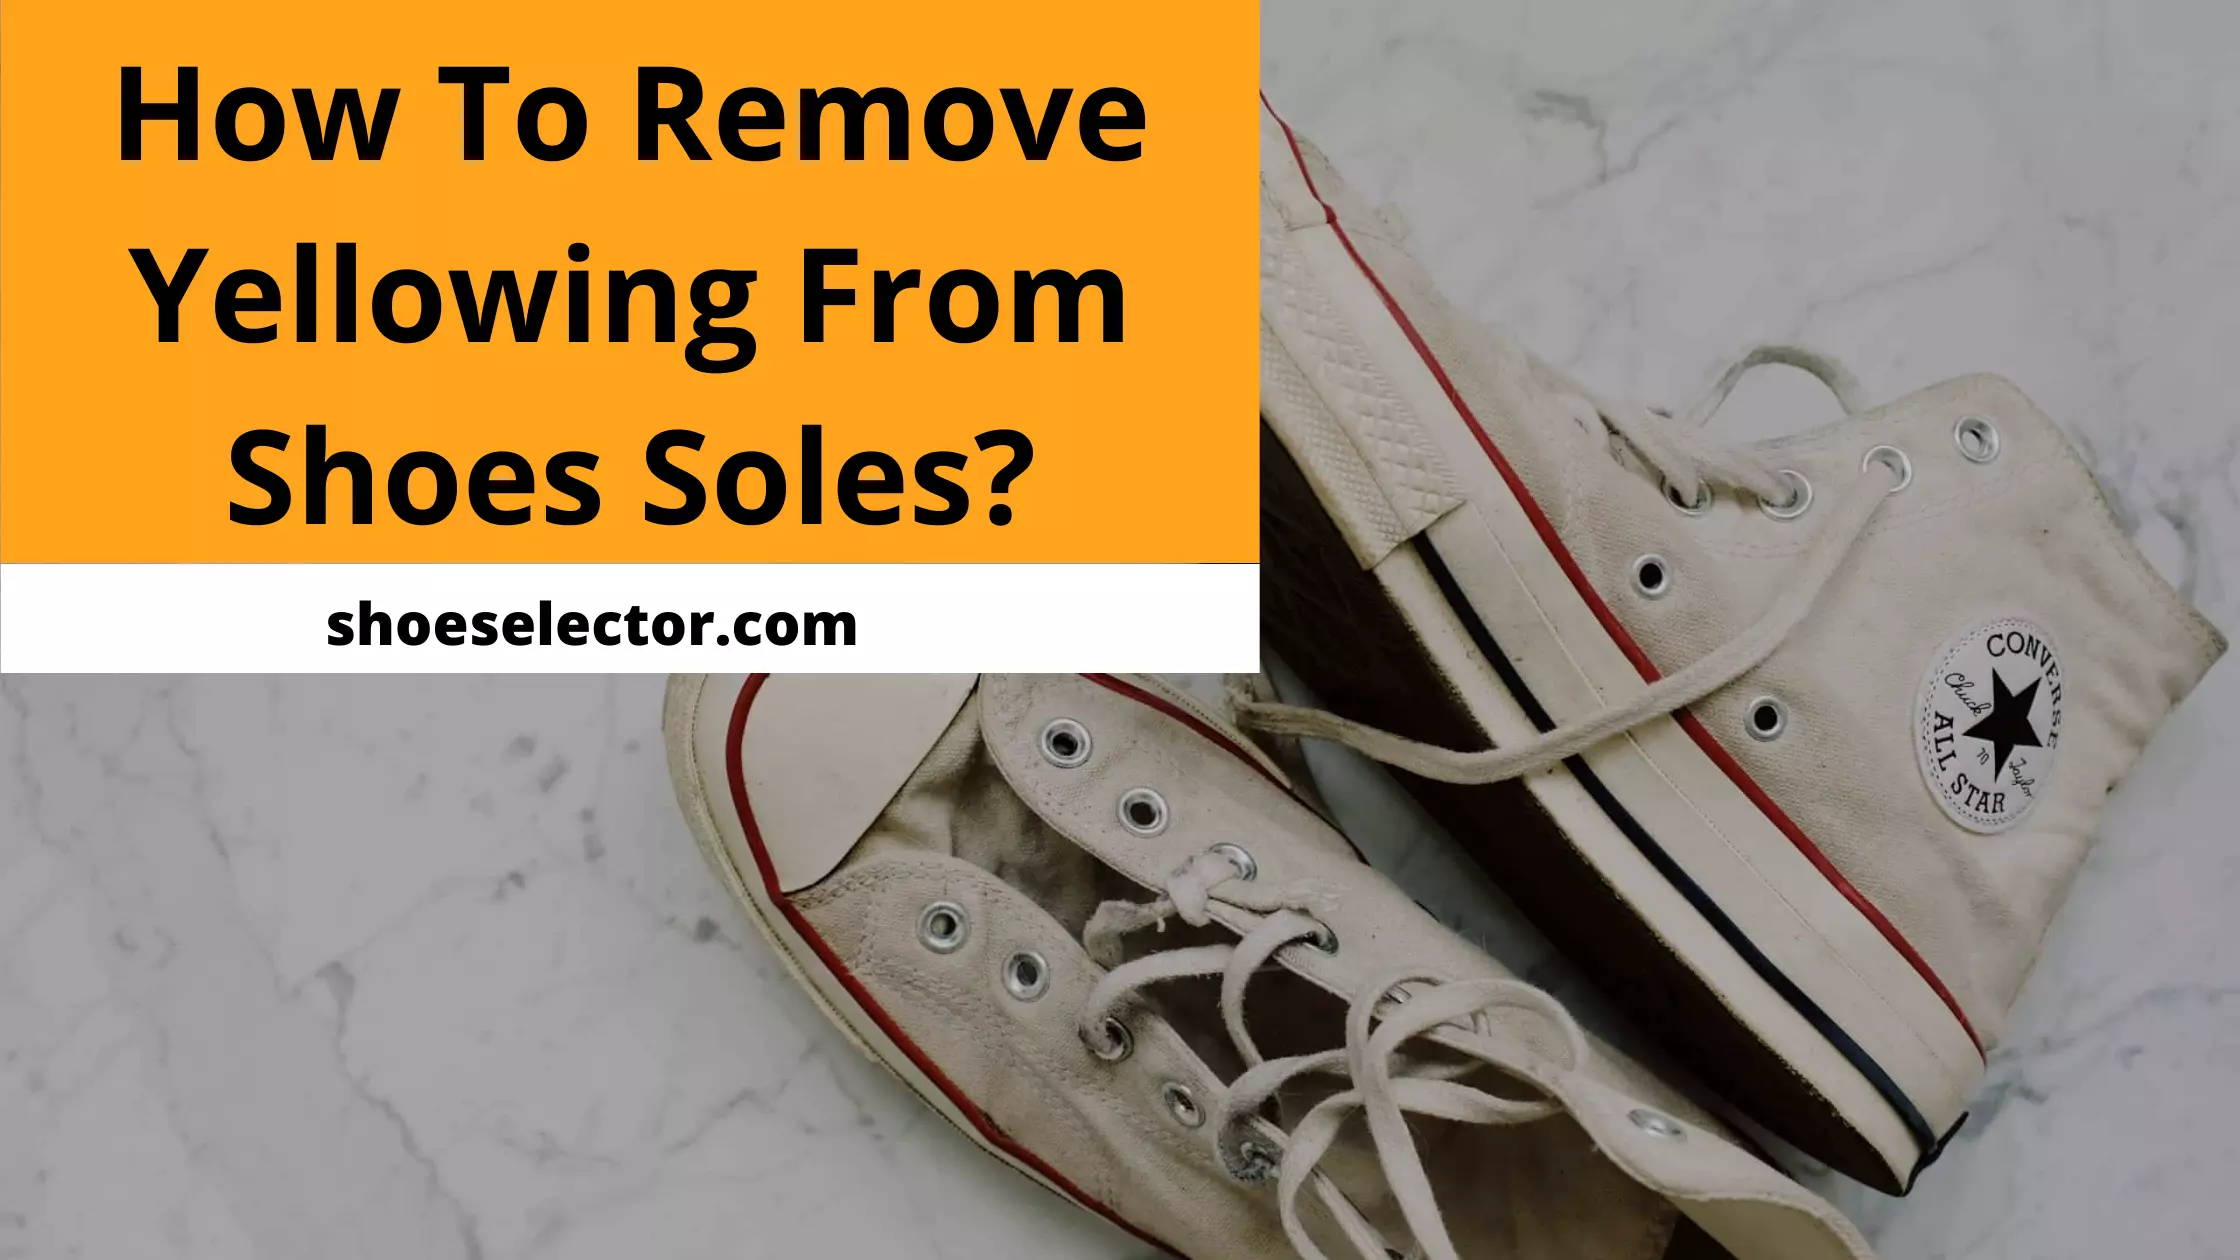 How To Remove Yellowing From Shoe Soles? 7 Simple Steps You Can Try